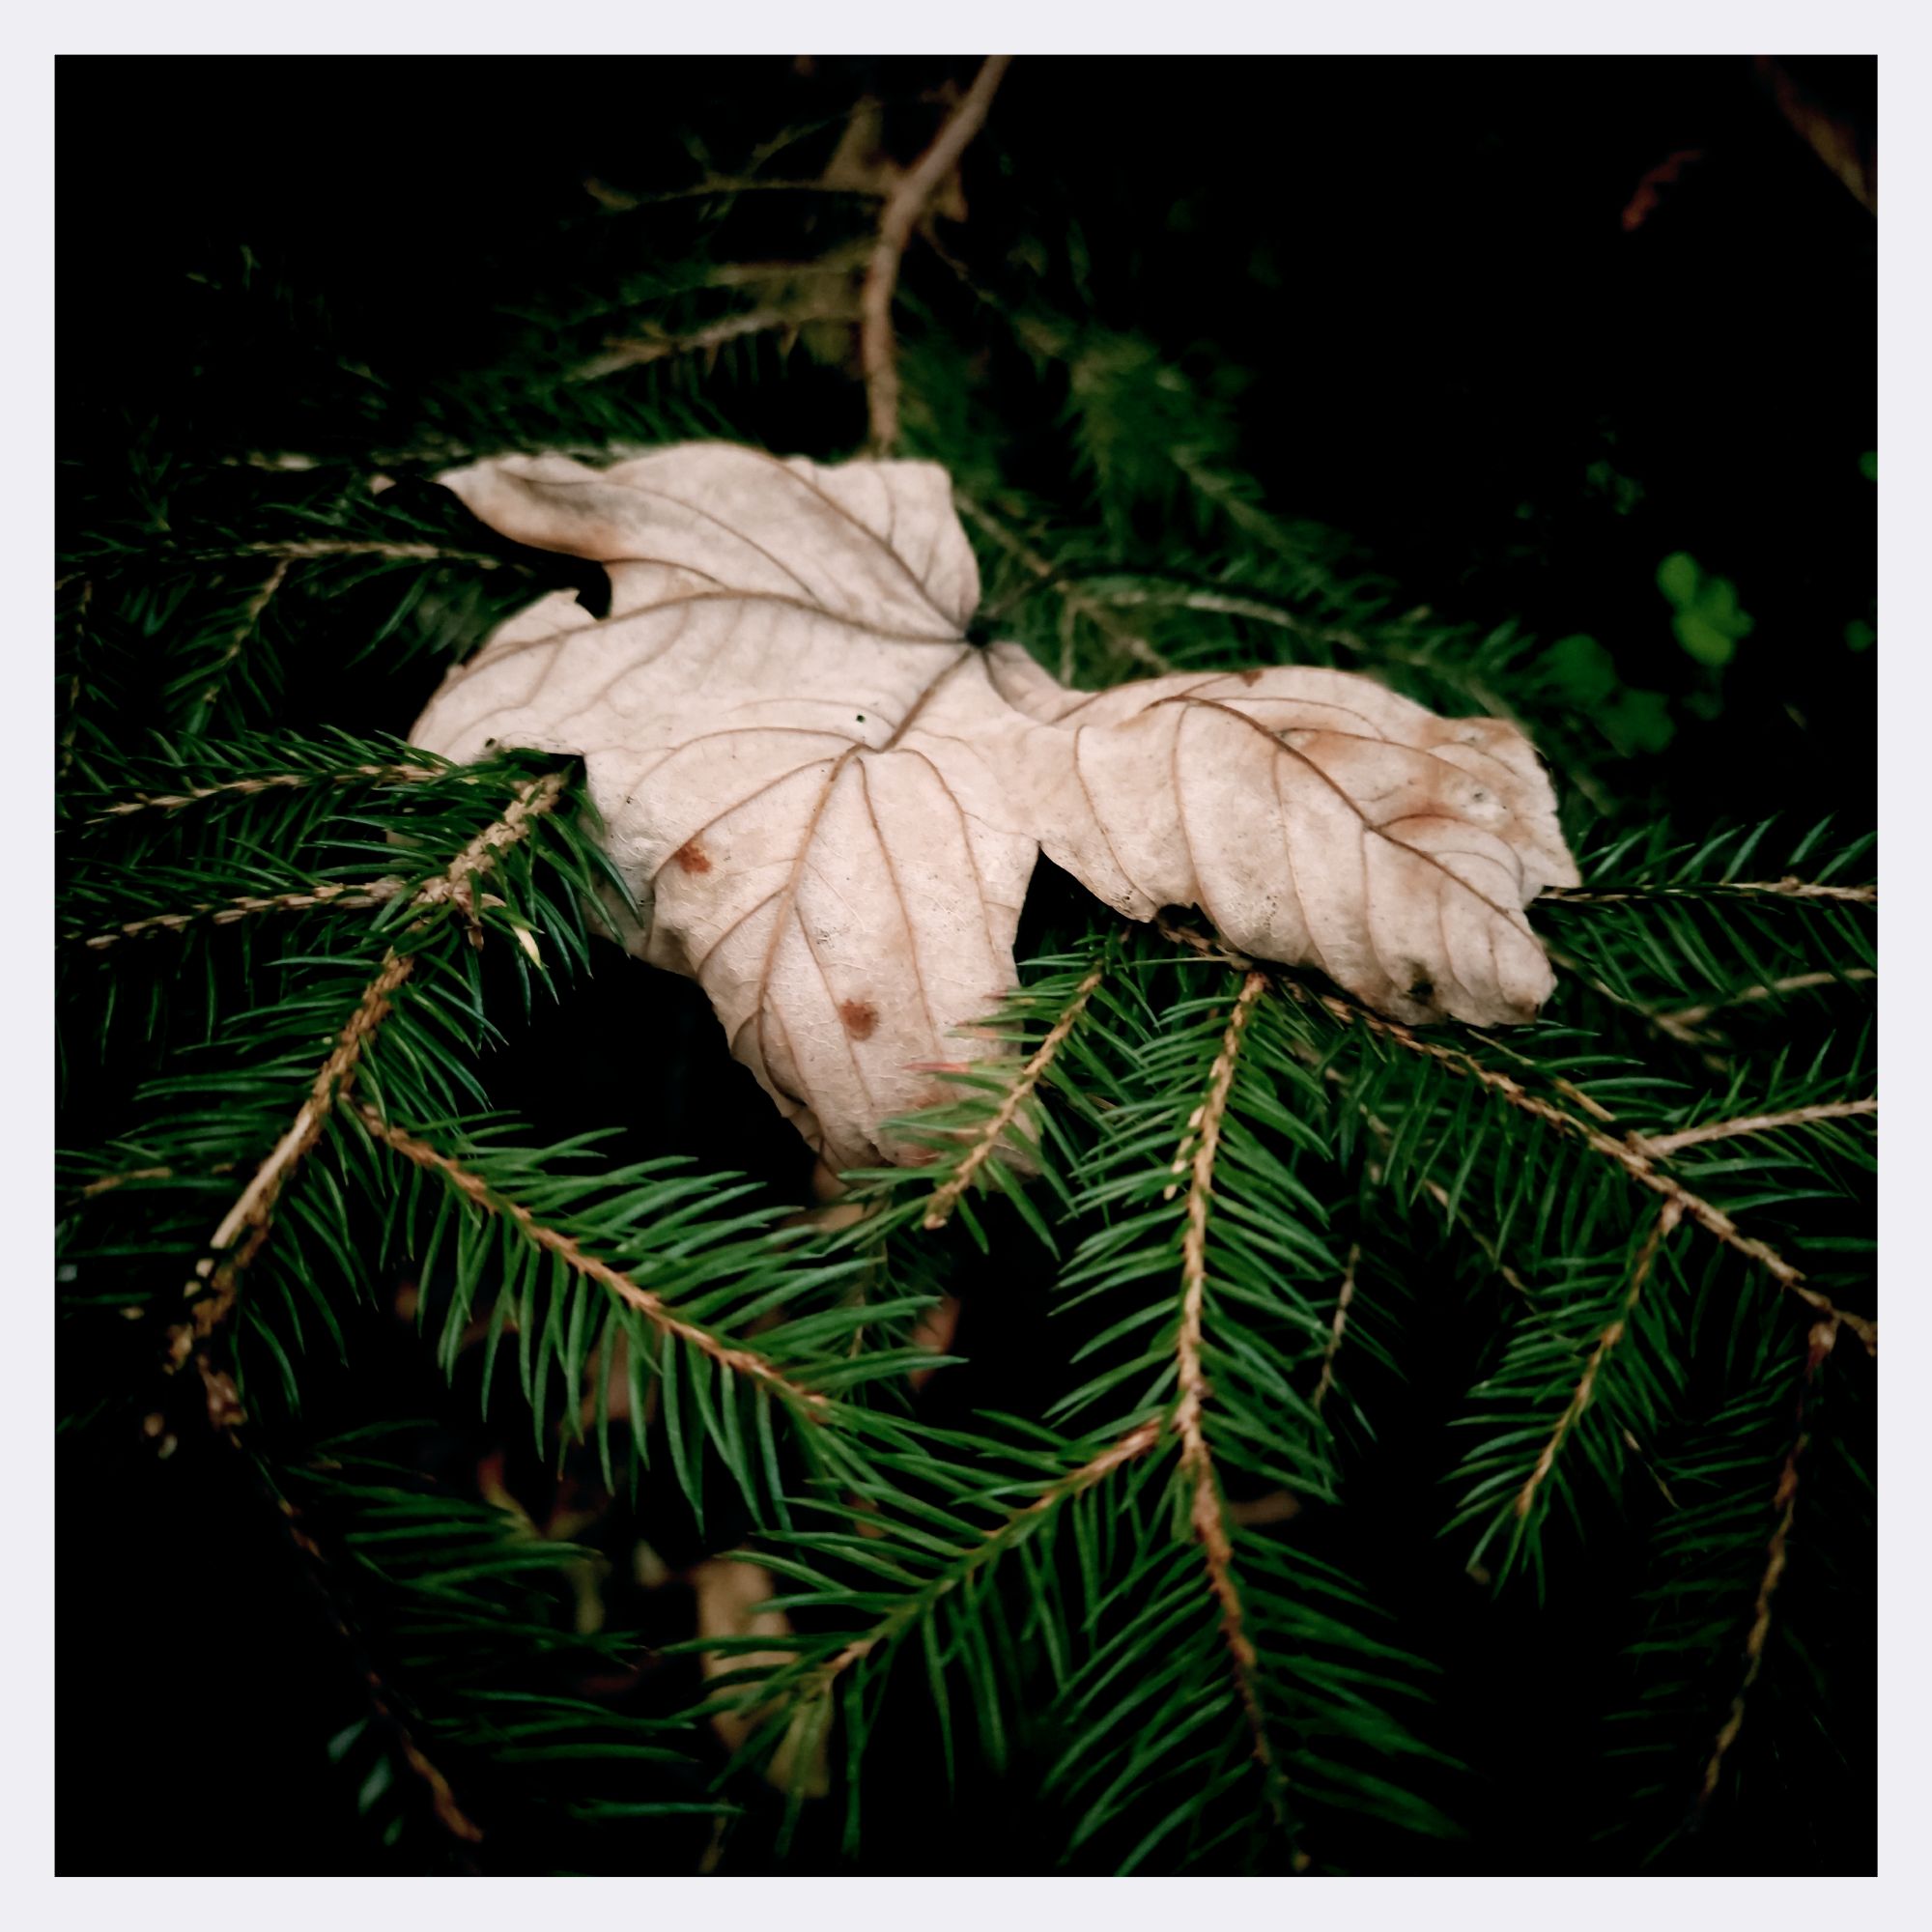 A dried brown leaf on conifer needles.